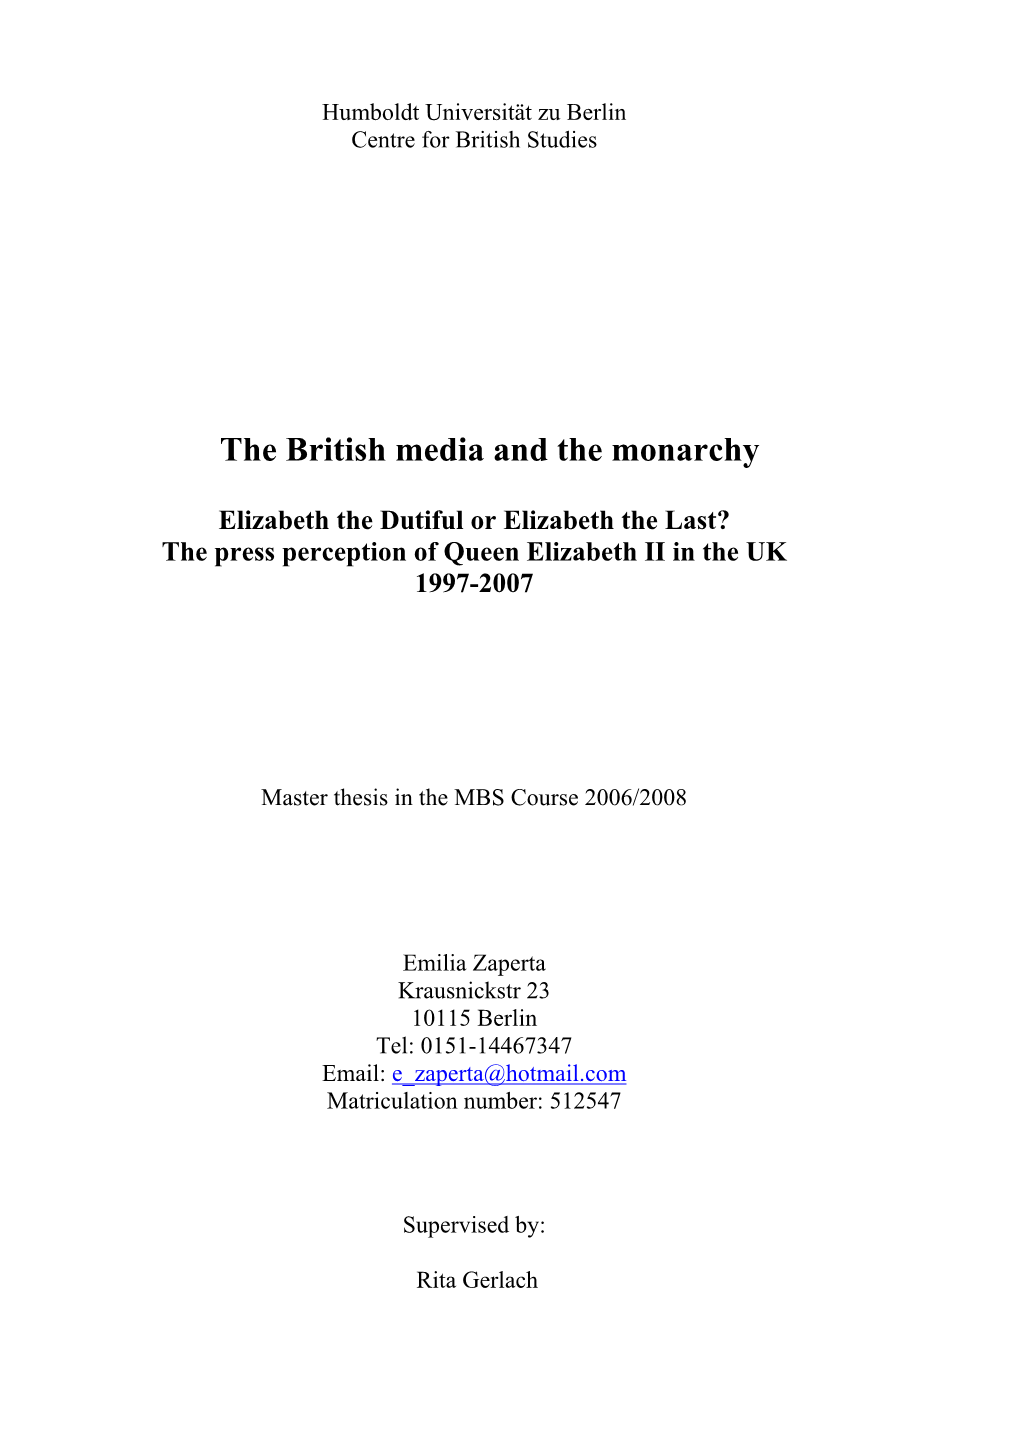 The British Media and the Monarchy